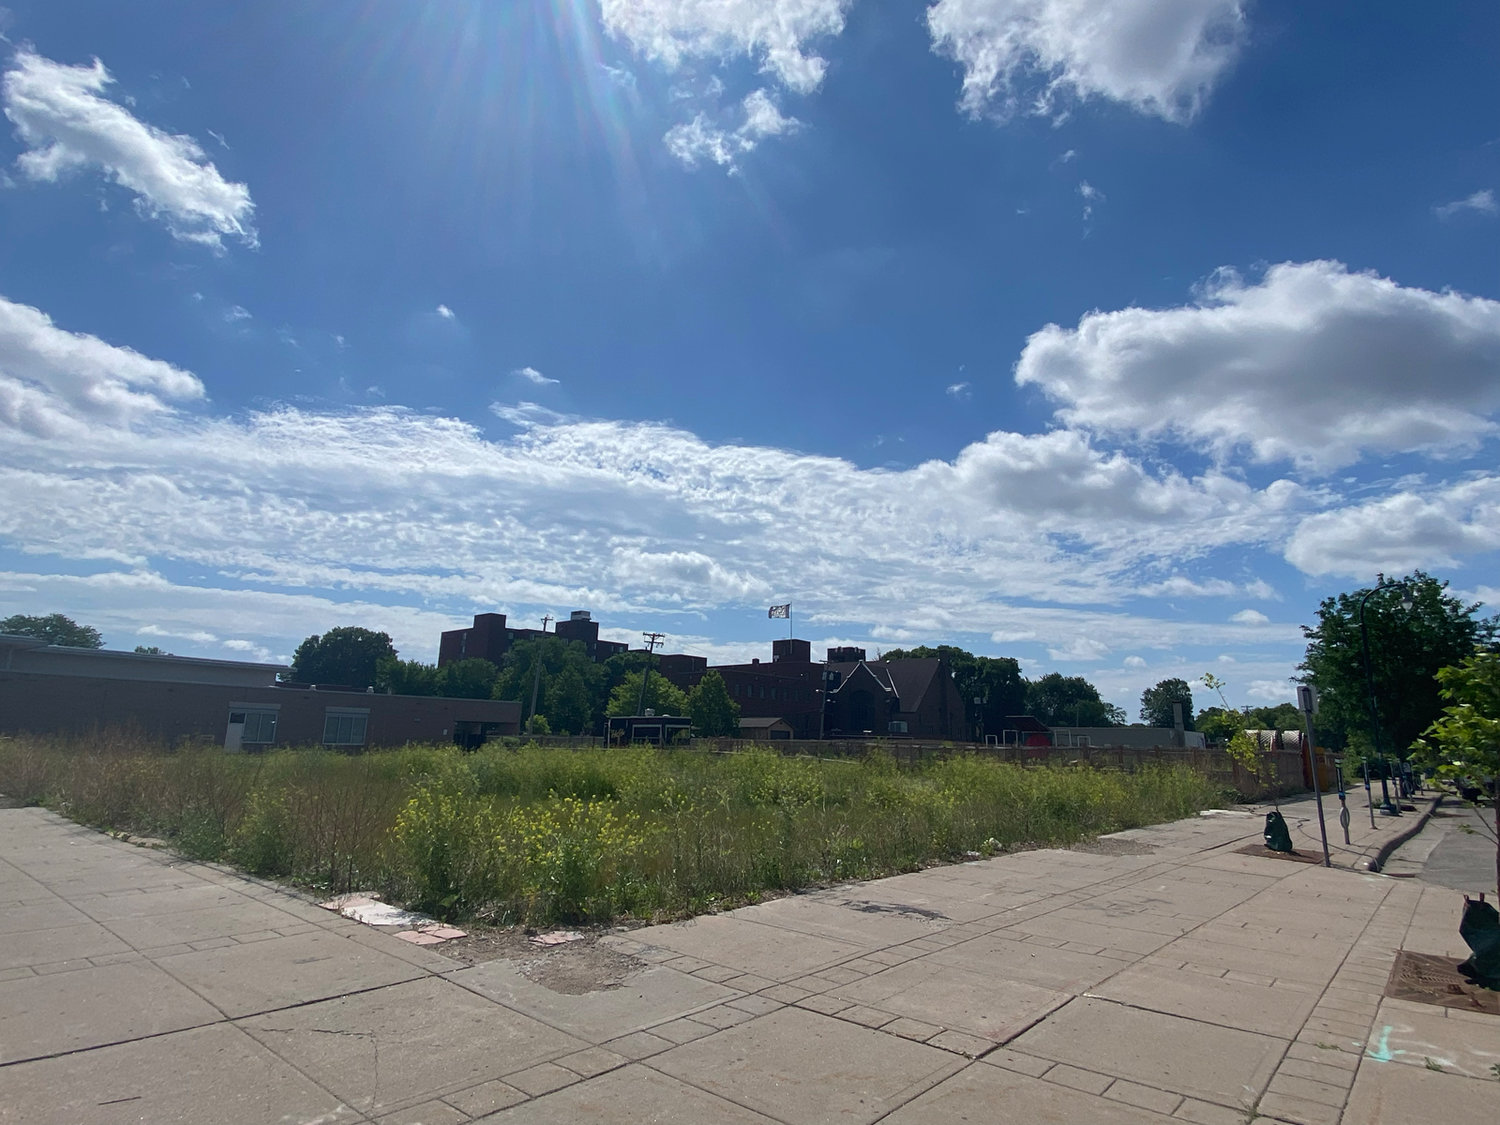 A view from E. Lake and 27th of the block where the Odd Fellows, Gandhi Mahal, MIGIZI and post office used to stand. The lots are mostly weeds now, with a fenced garden at the Gandhi Mahal property. June 2022